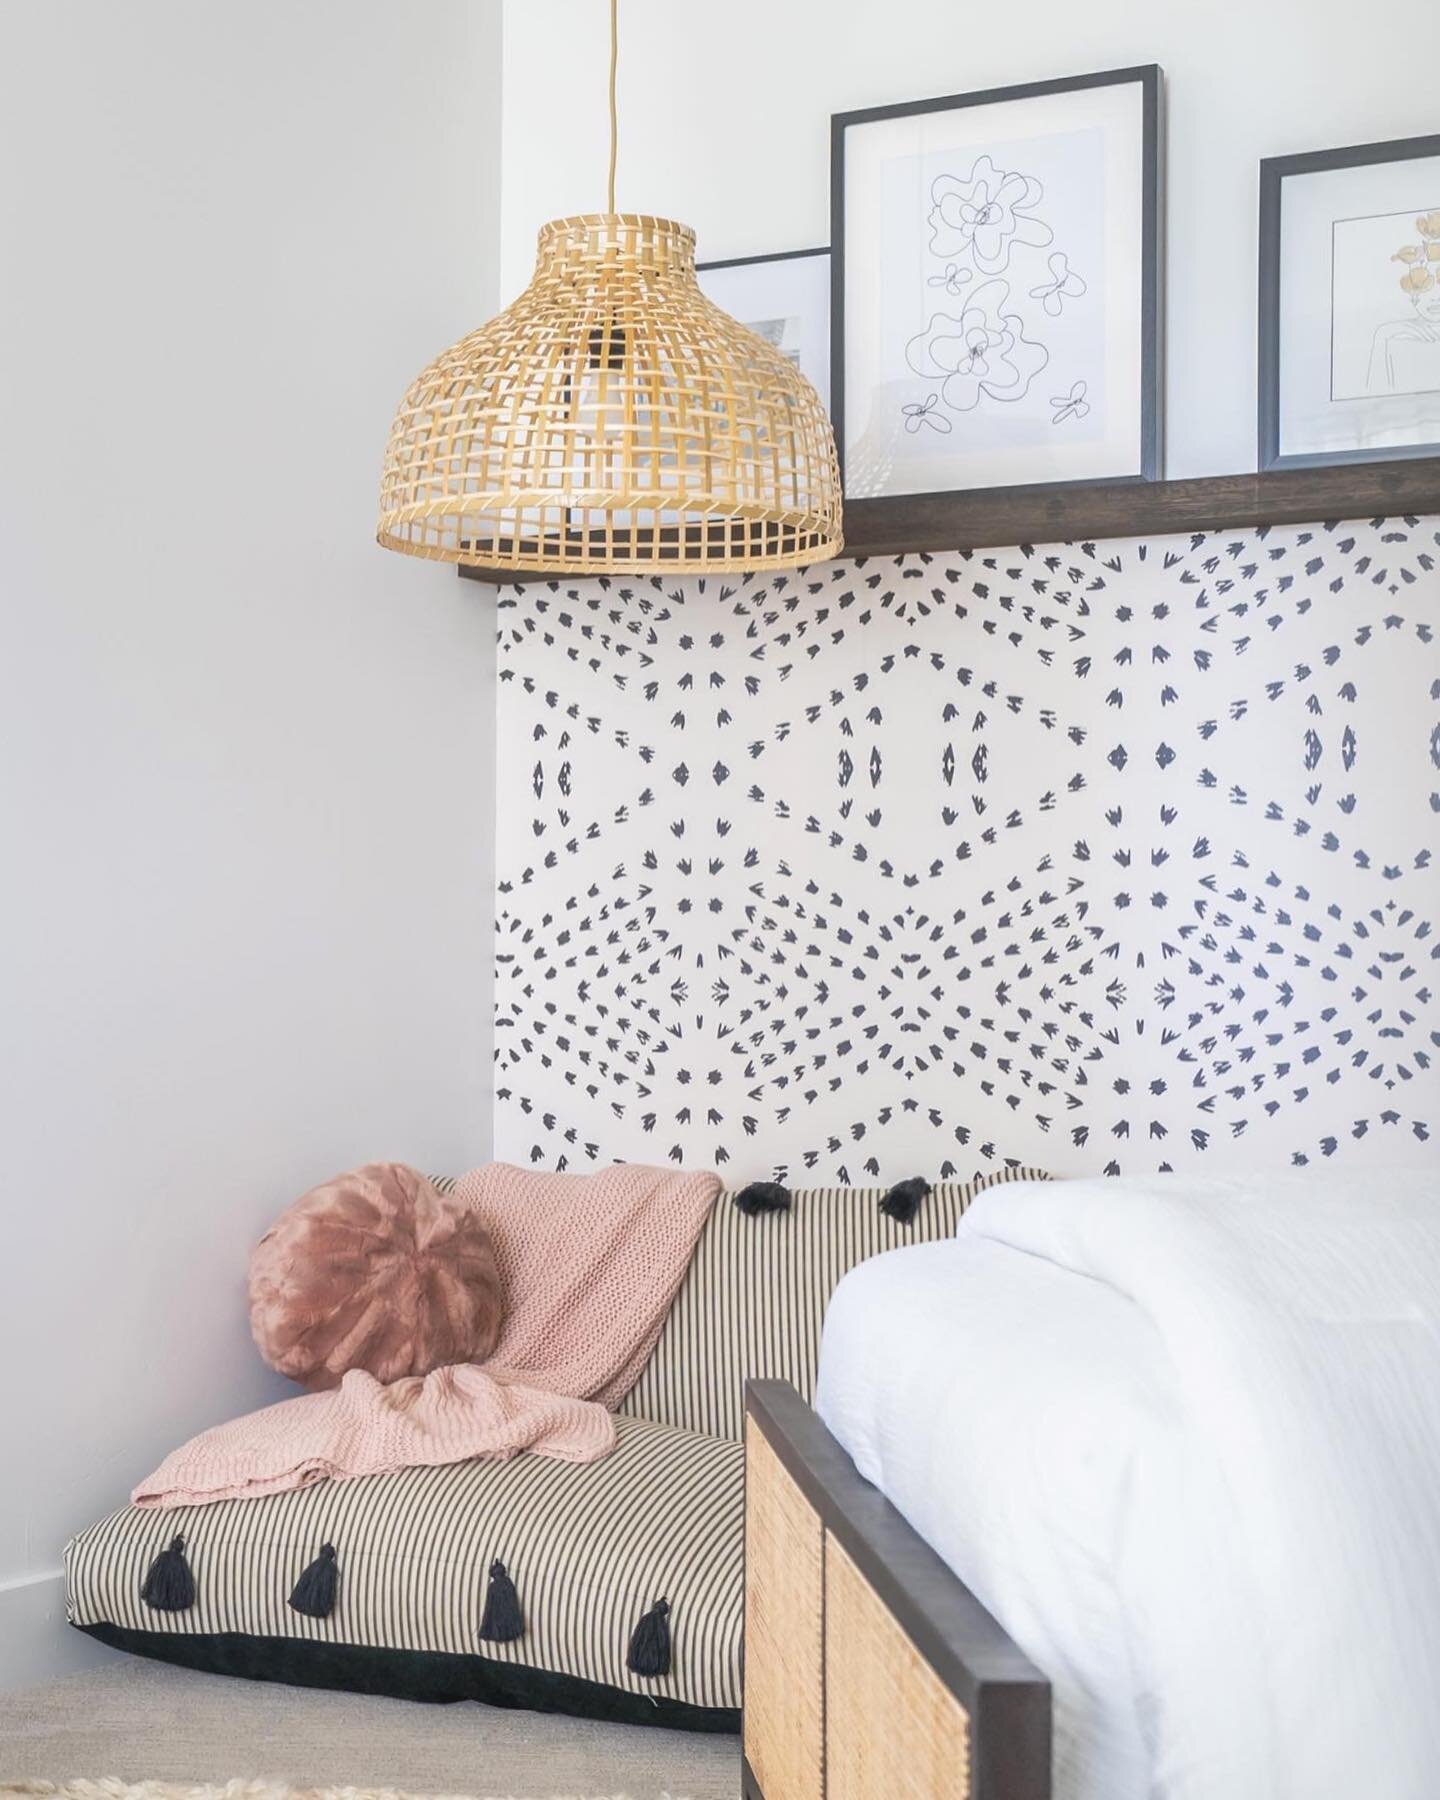 Love the custom details in this girls bedroom &amp; bath 💗
⠀
A beautifully designed space by the talented ladies at @lusi_design_denver &amp; @a.i.interiors for the #designershowhouse2021 with @denverlifemagazine 

📸 by @k.j.studios_ 
⠀
#denverdesi